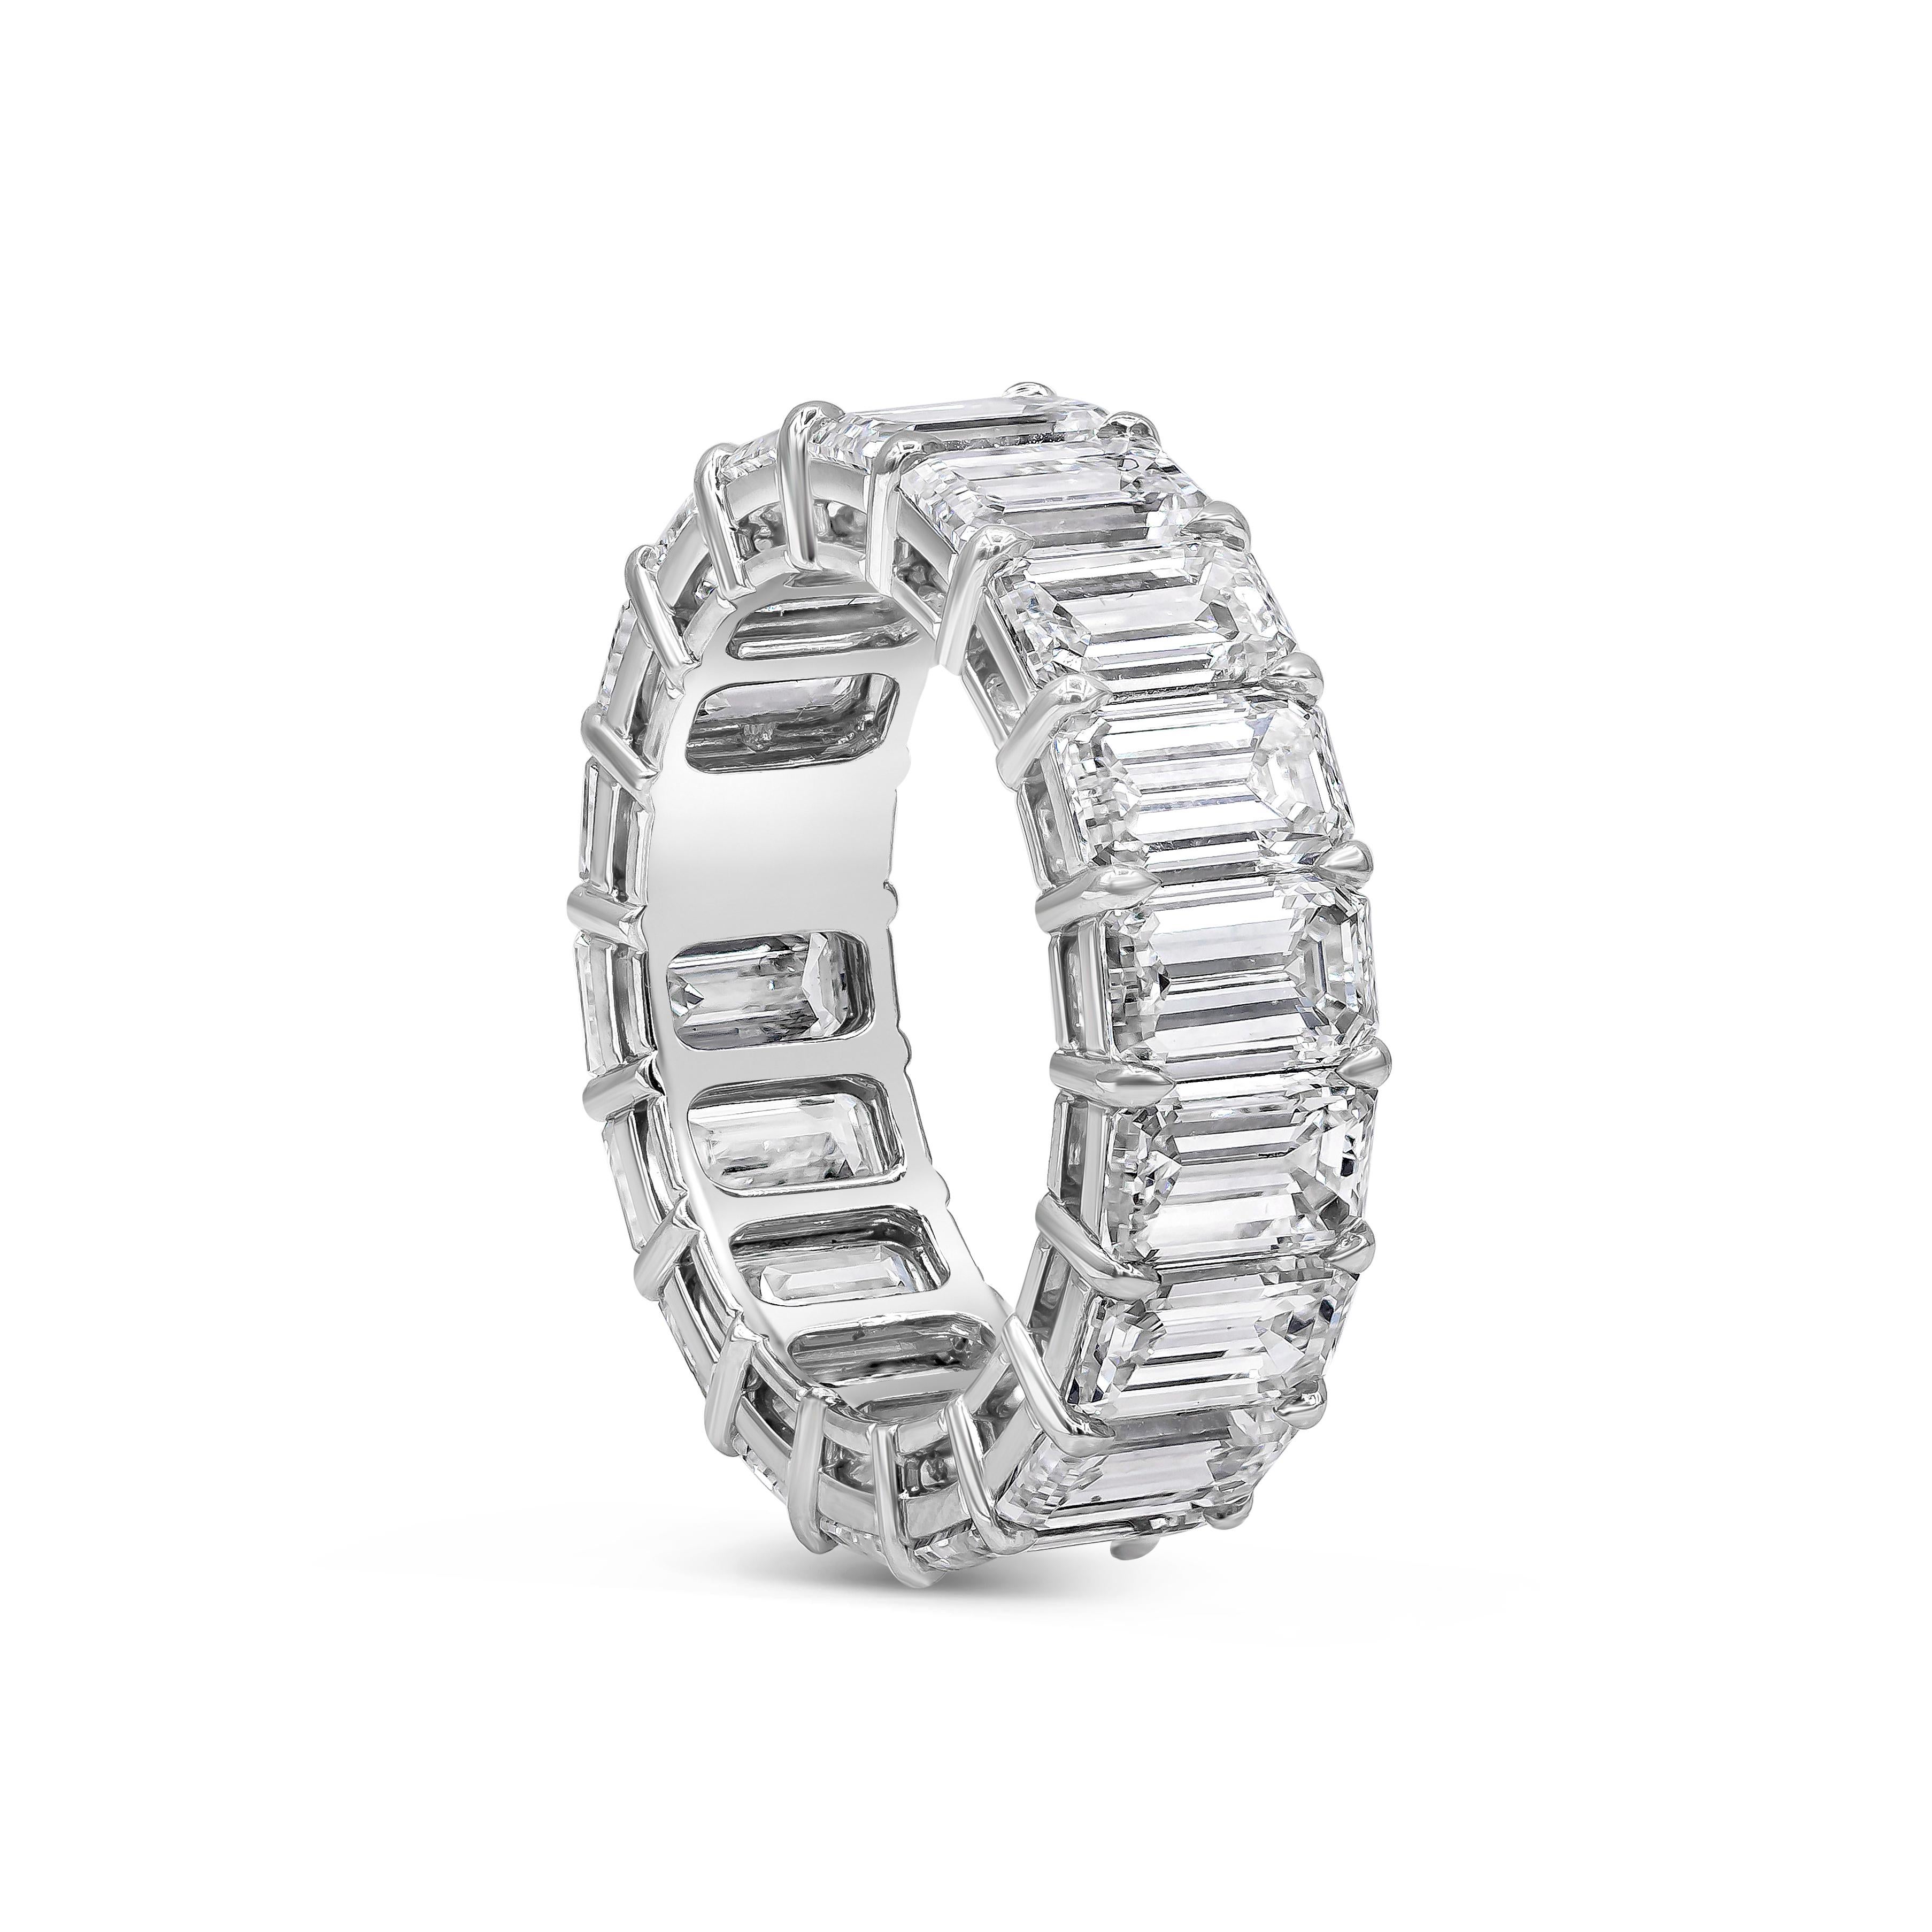 A timeless piece eternity wedding band ring showcasing emerald cut diamonds weighing 9.94 carats total, F+ color and VS+ in clarity. Set in an open gallery setting made in Platinum, Size 6 US.

Roman Malakov is a custom house, specializing in